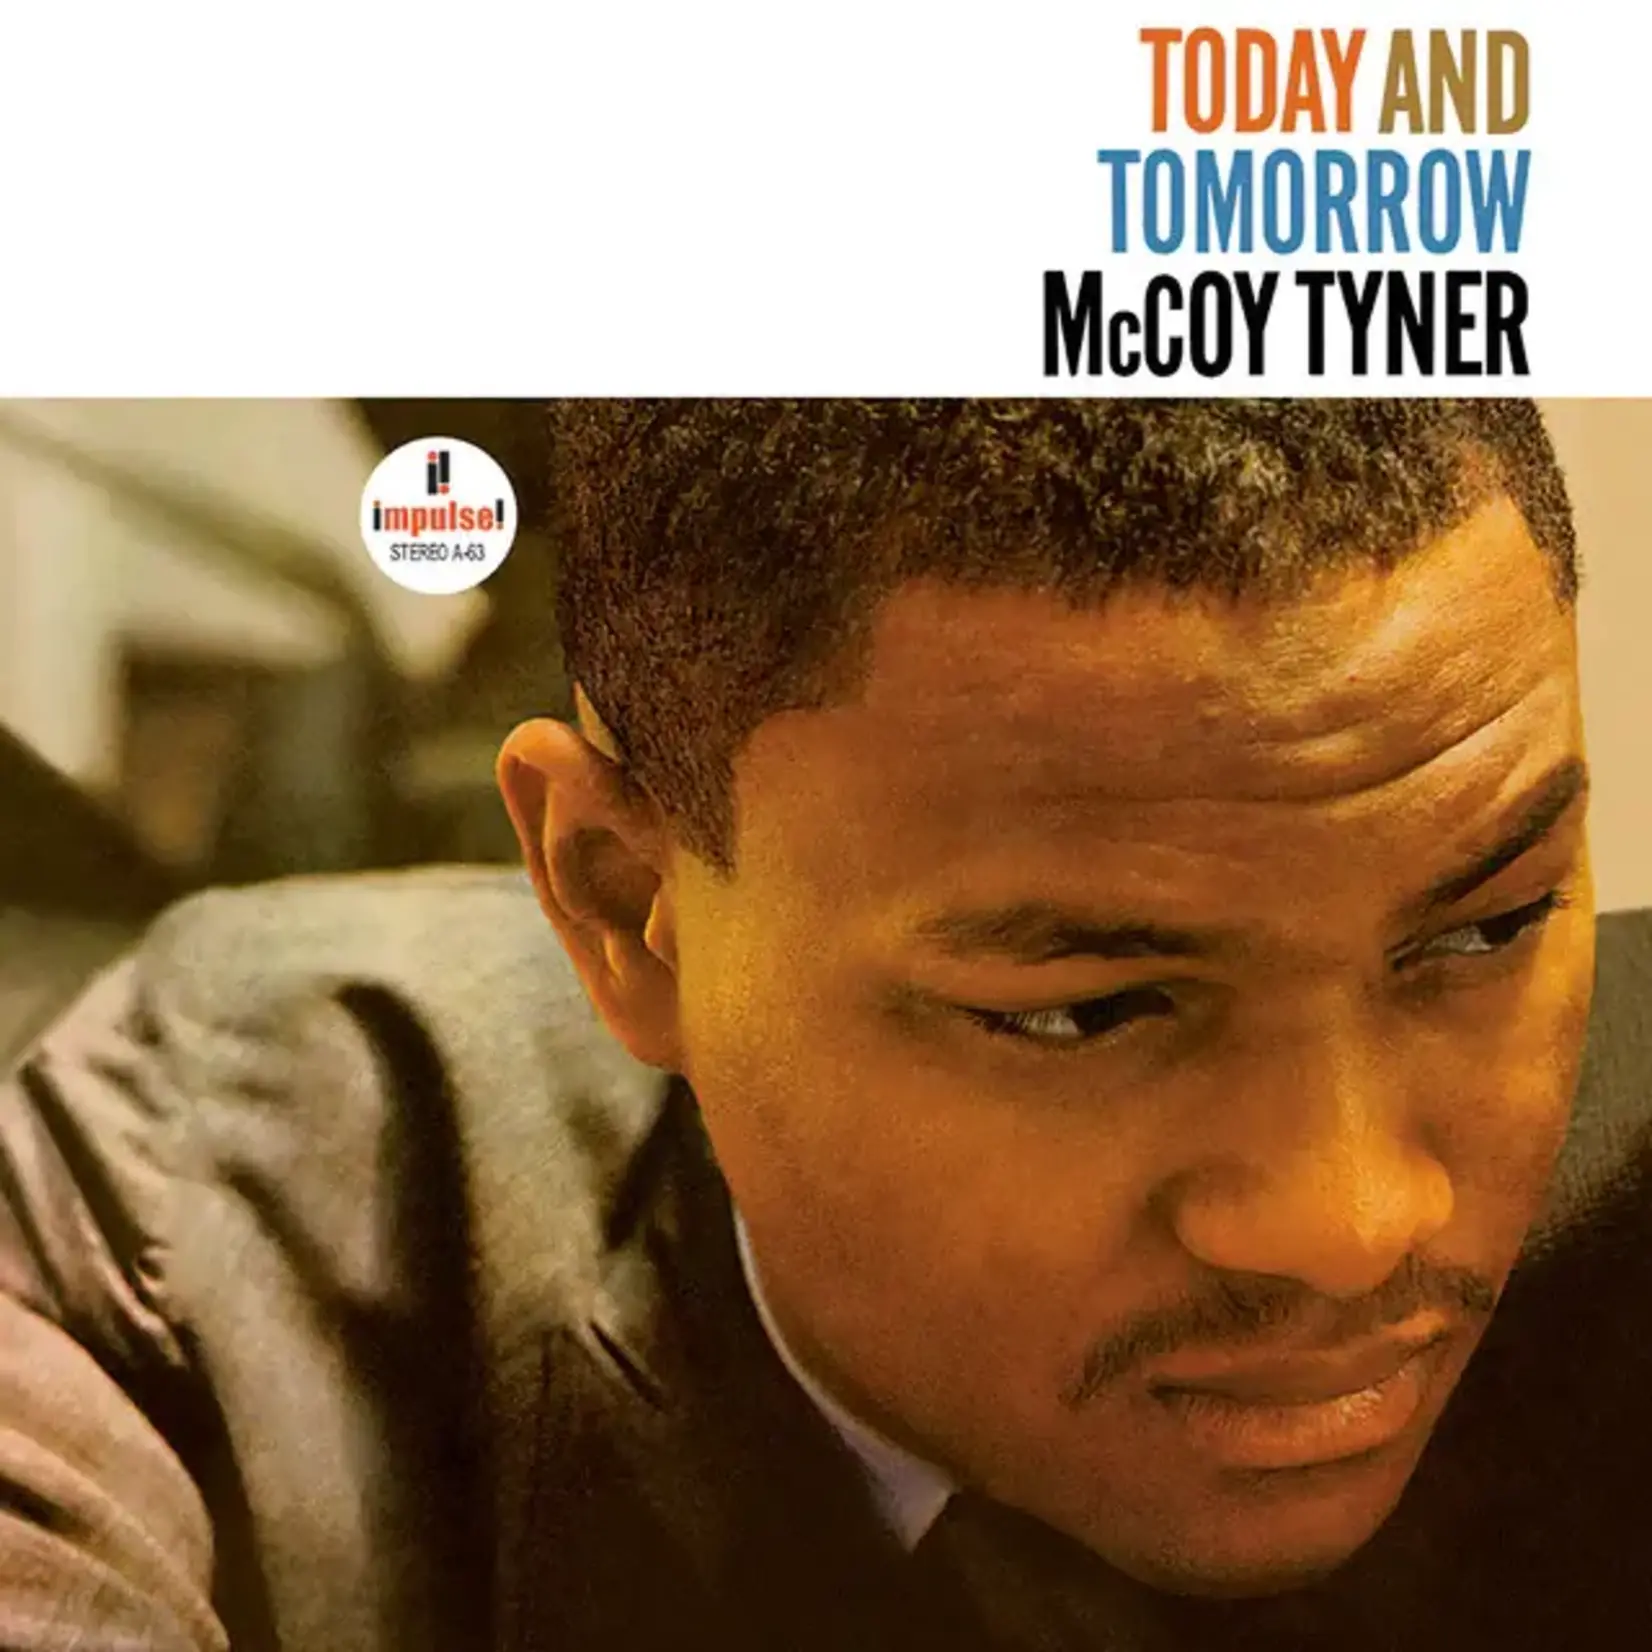 [New] Tyner, Mccoy: Today And Tomorrow (Verve By Request Series) [VERVE]